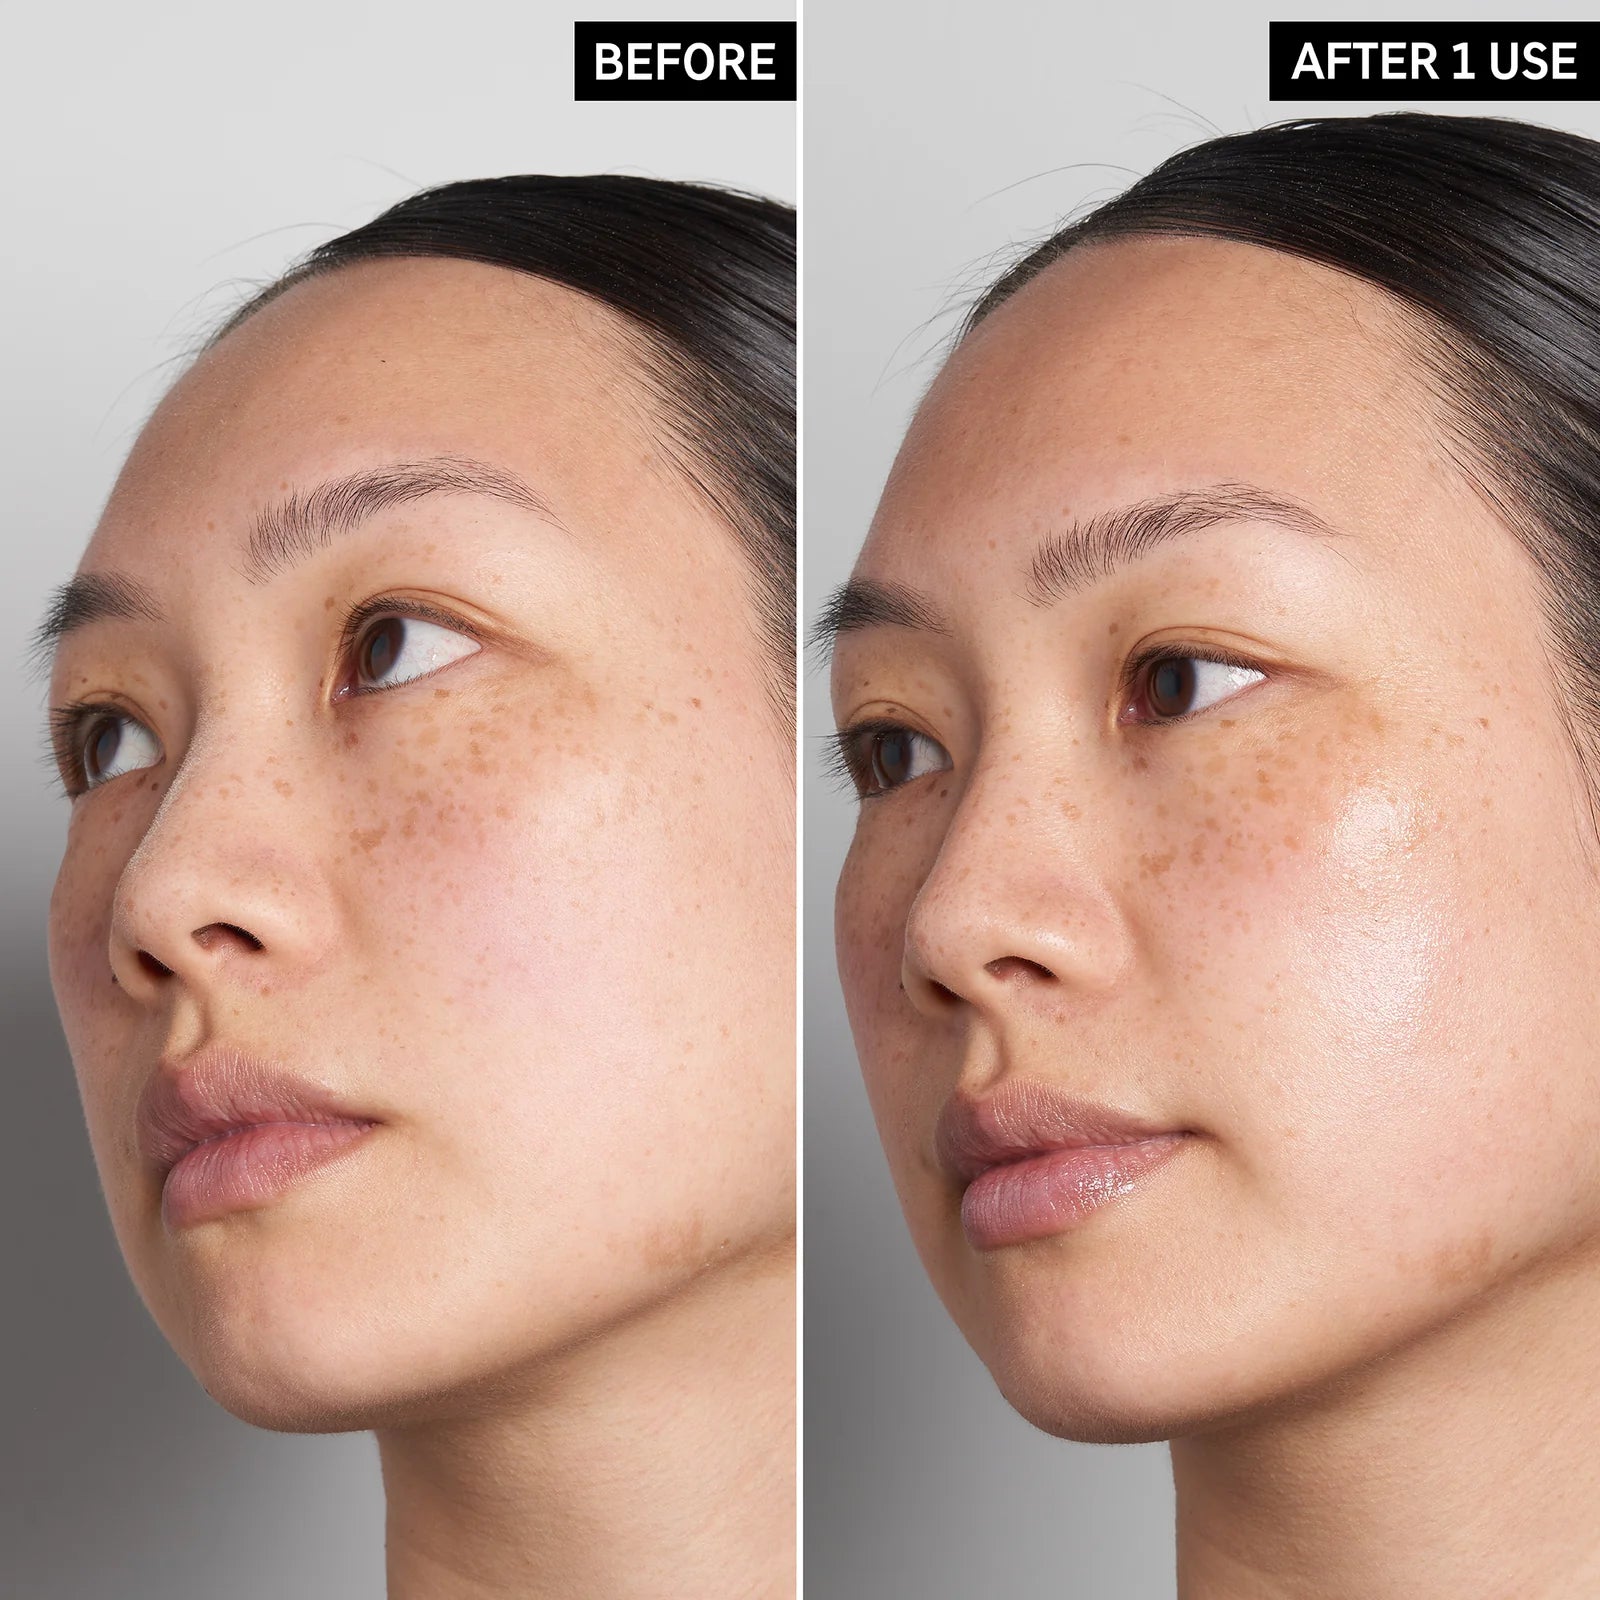 image showing before and after results of using inkey hyaluronic acid serum available at Heygirl.pk for delivery in Pakistan